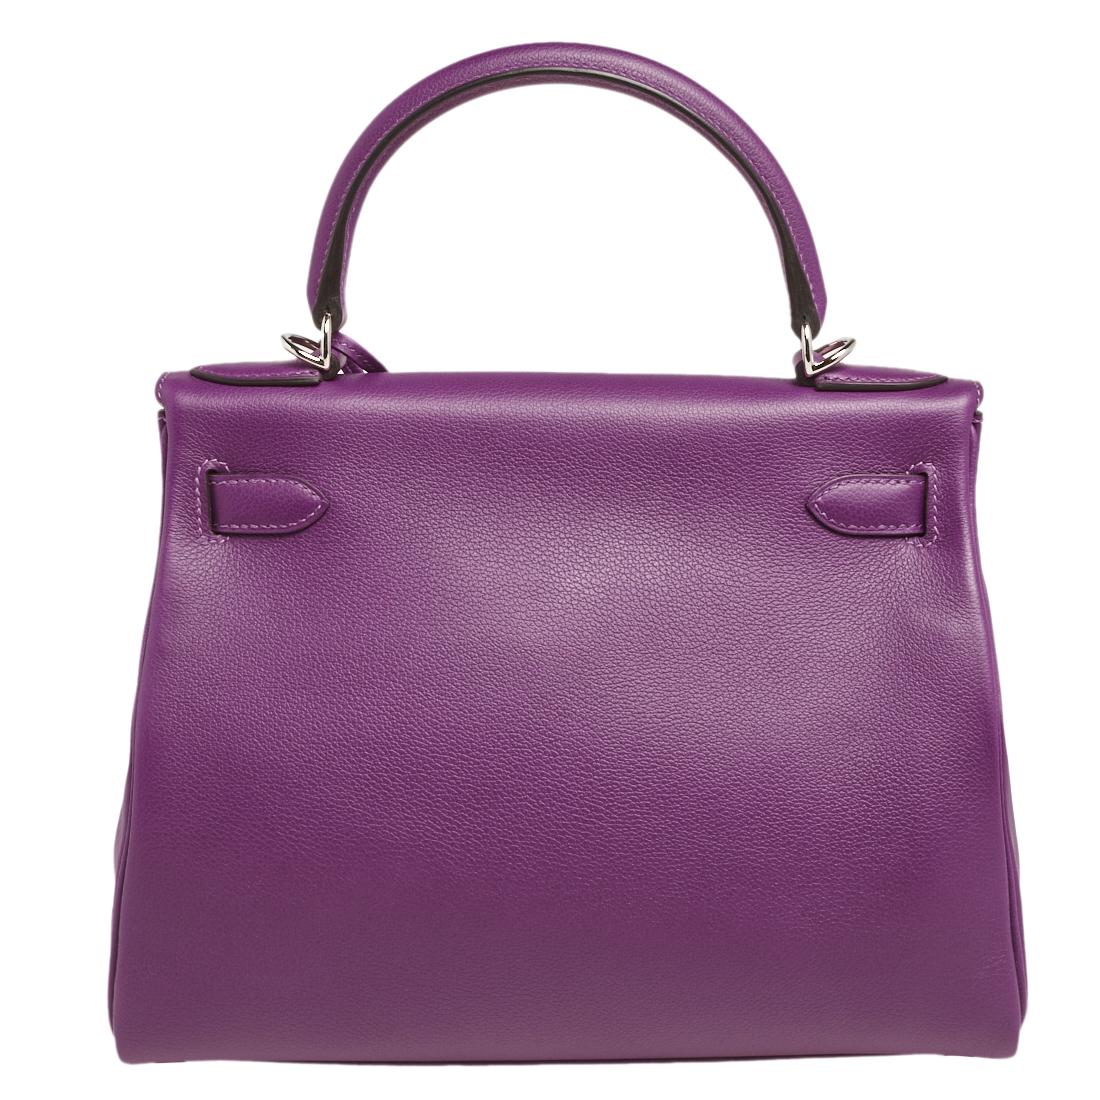 The Hermes Kelly is beautiful as it is carefully hand-stitched to perfection. This Kelly Retourne is crafted from Evercolor leather and has palladium-plated hardware. Retourne has a more casual look and is stitched on the inside thus making its